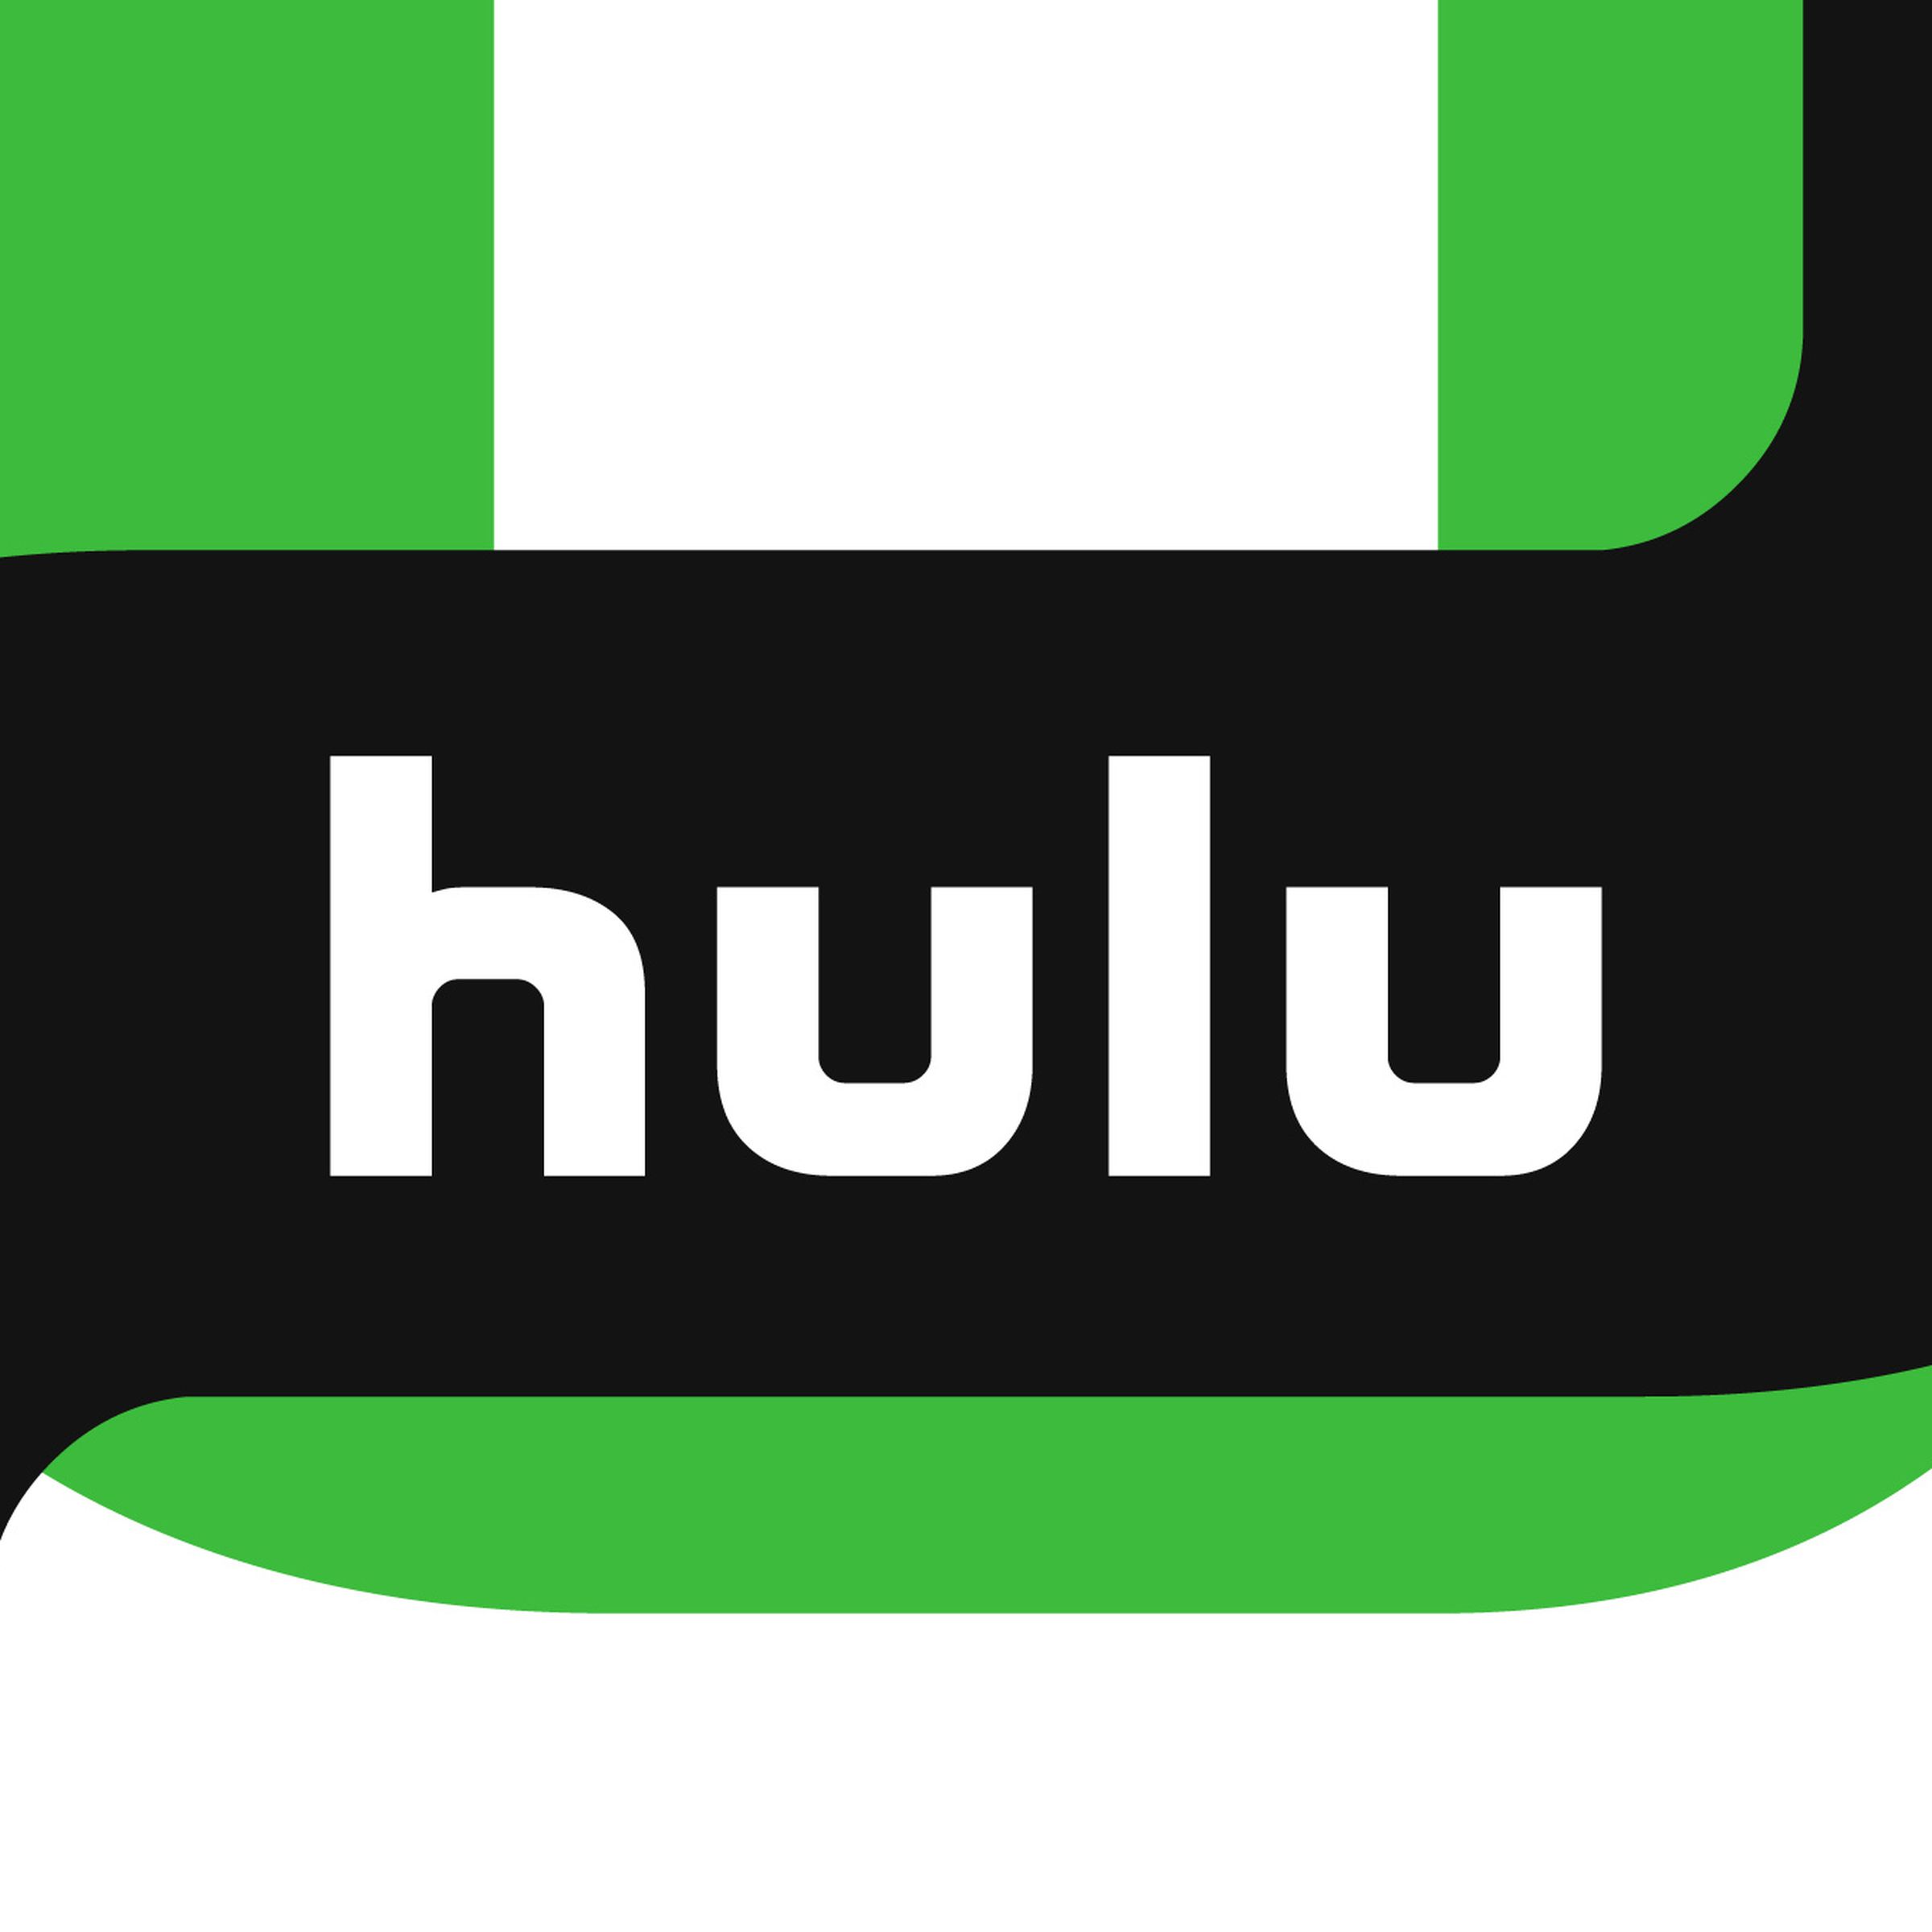 Hulu logo in the middle of a striped background.